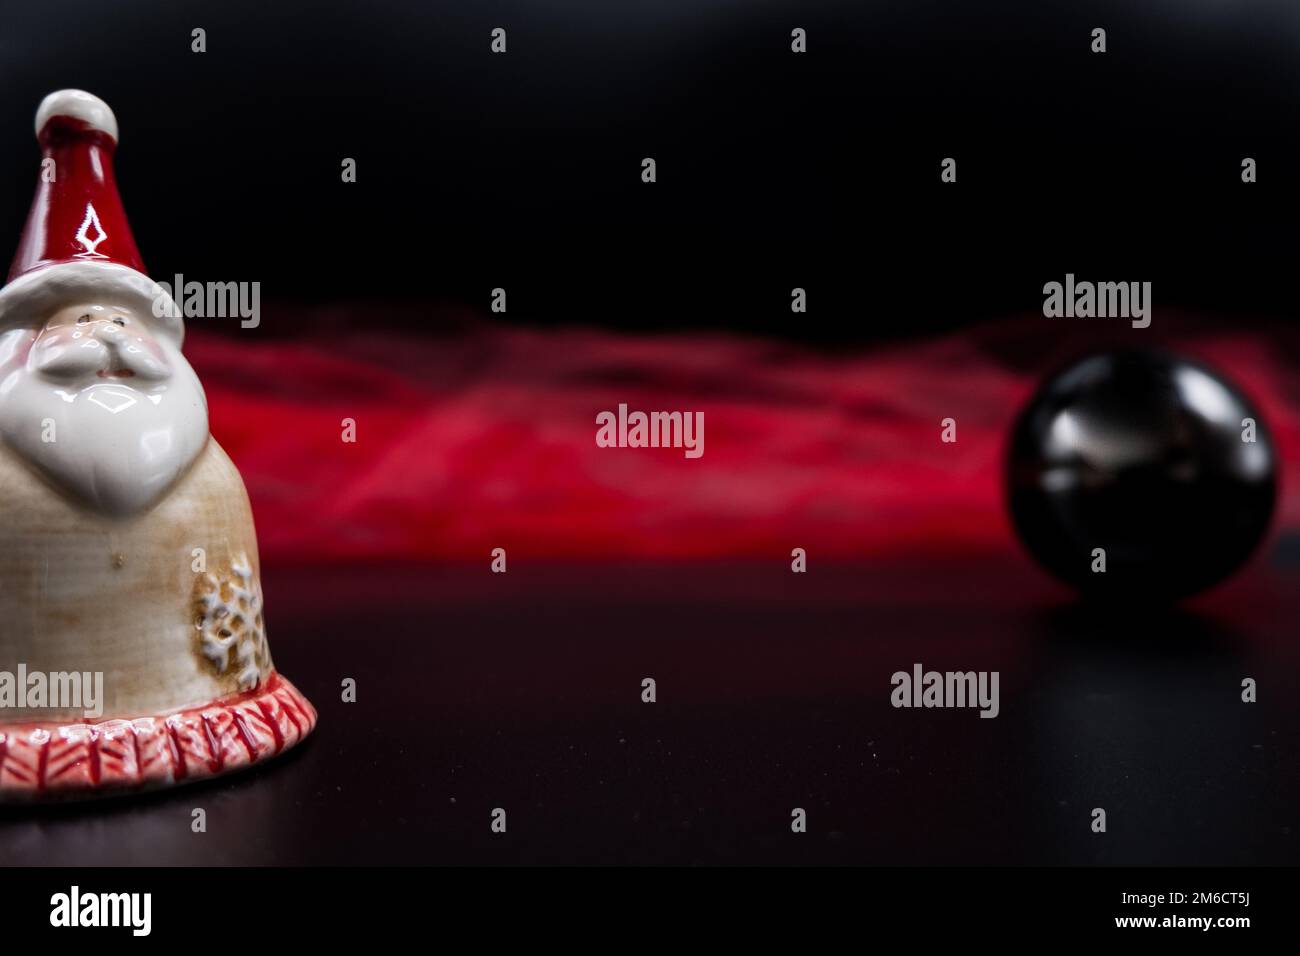 Santa Claus figure, black Christmas ball and red fabric on black. Stock Photo